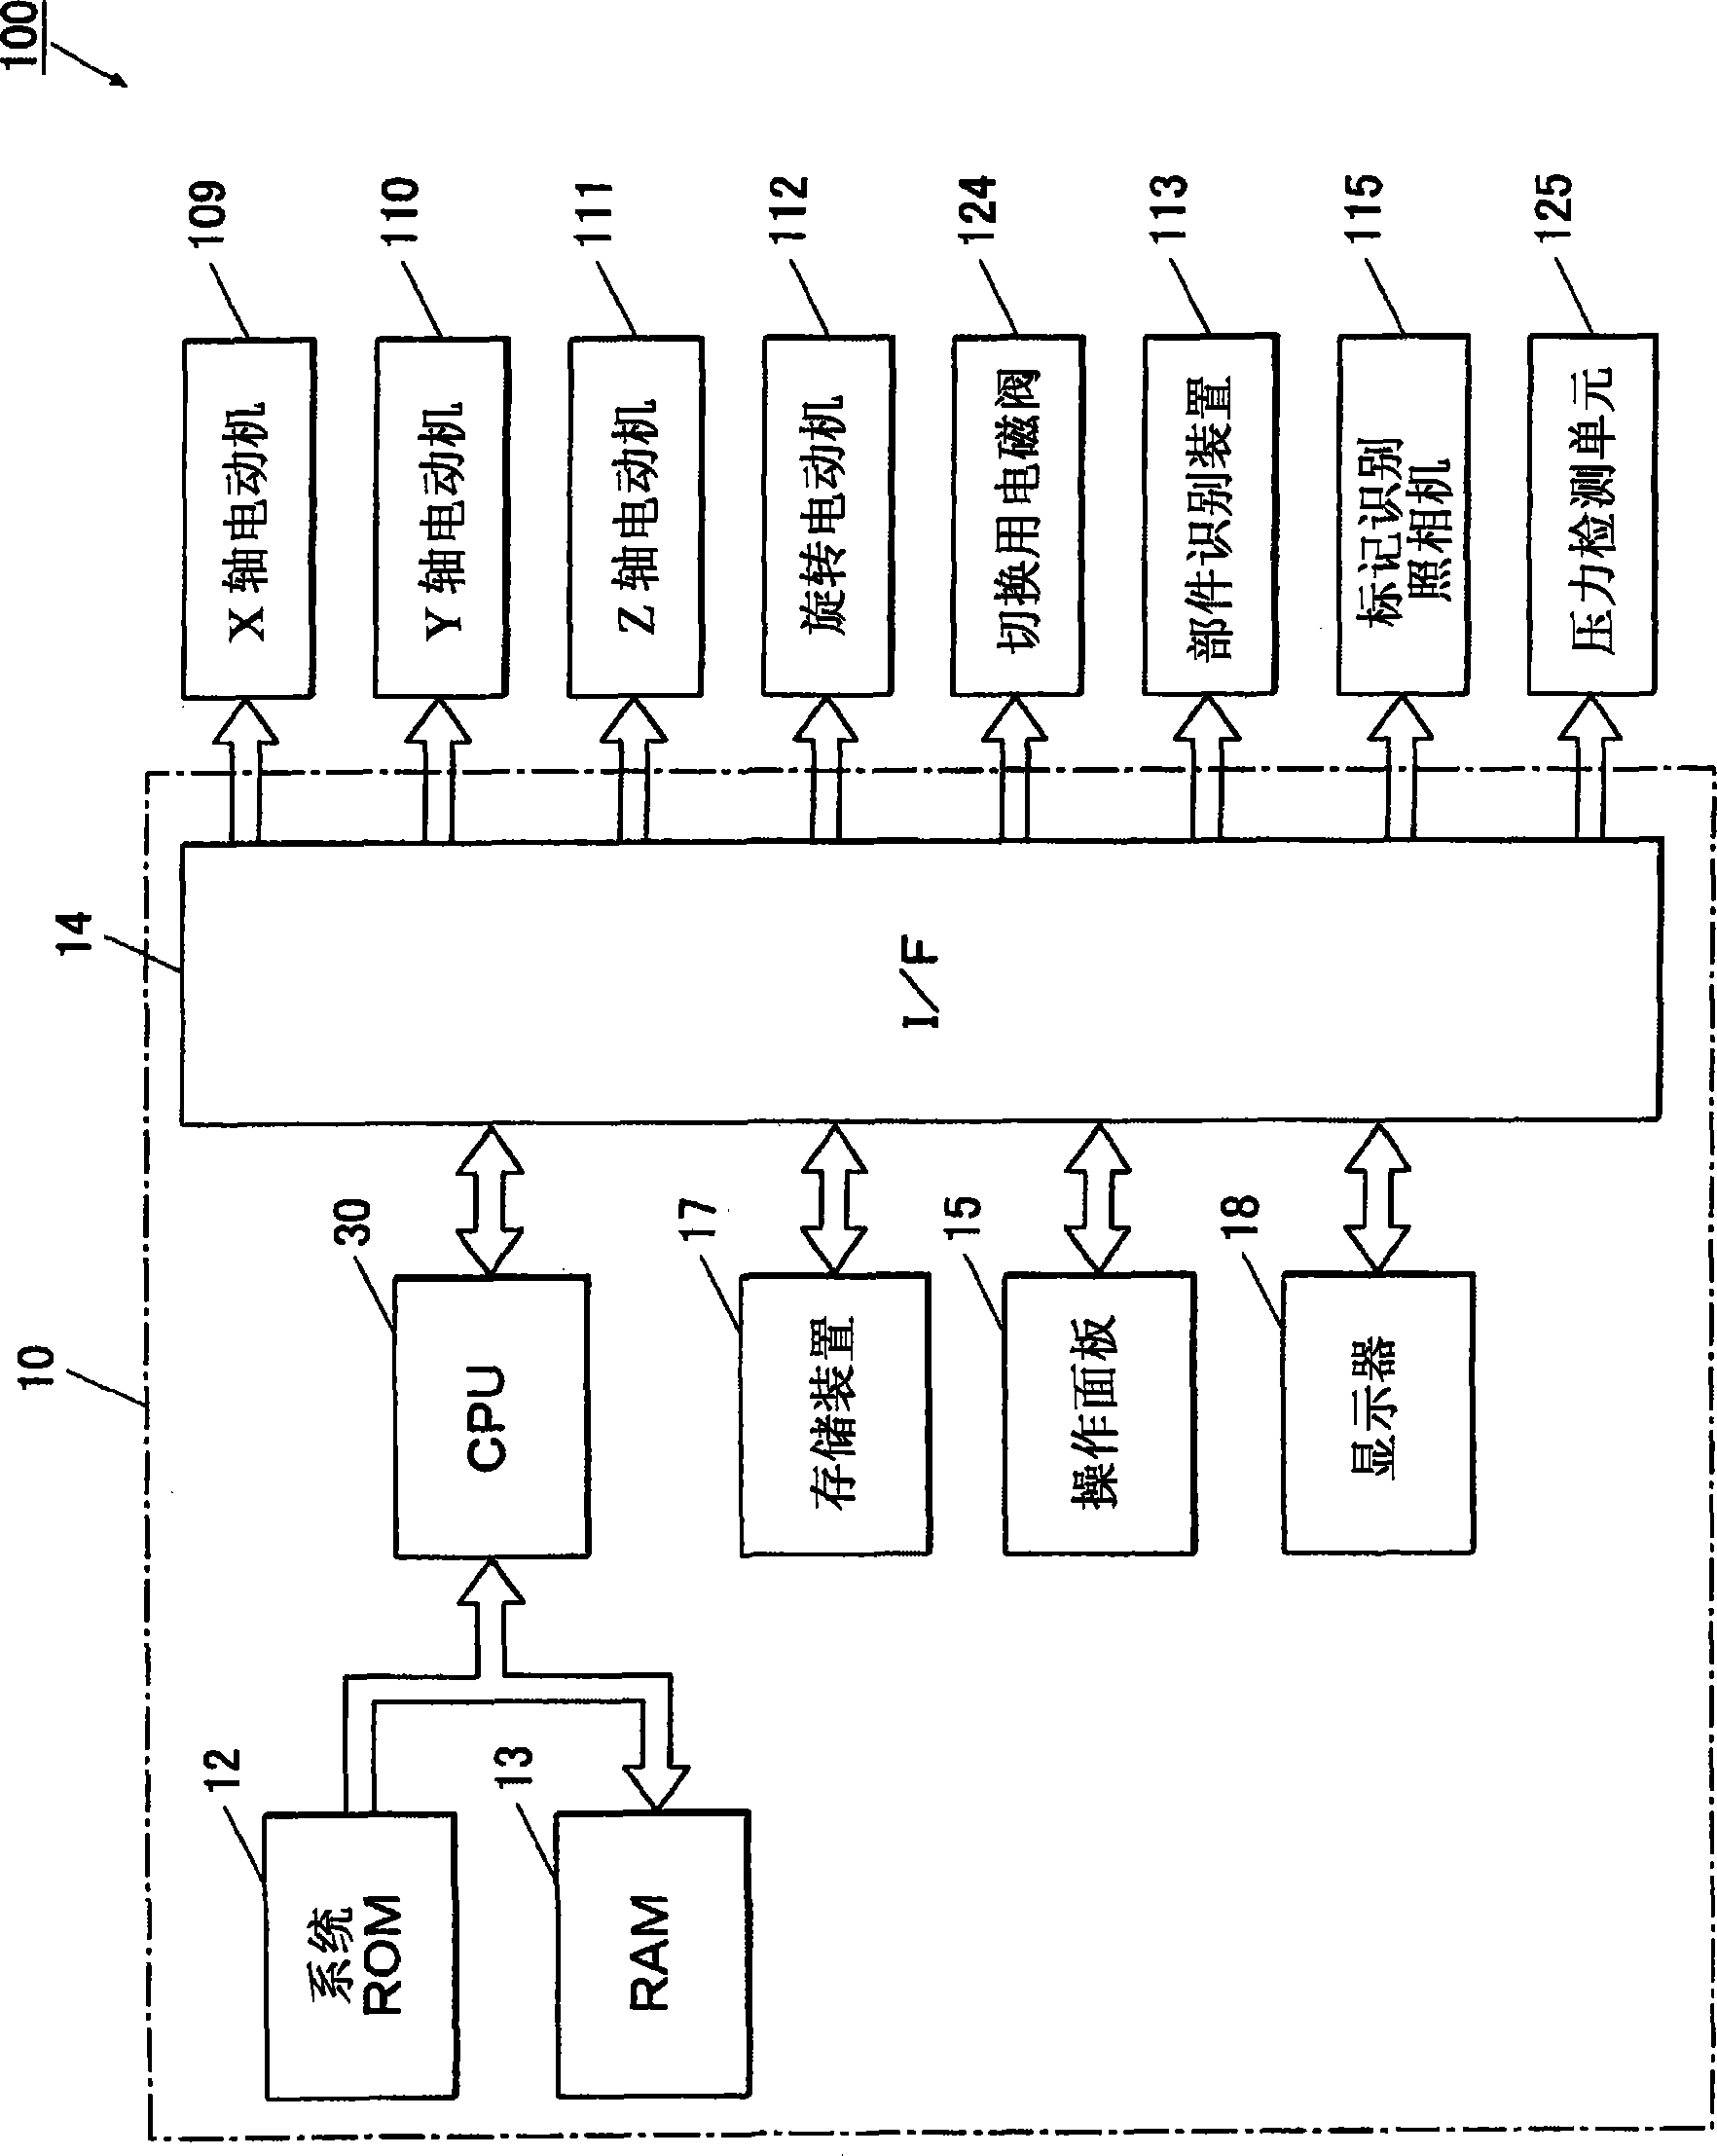 Electronic compound mounting device